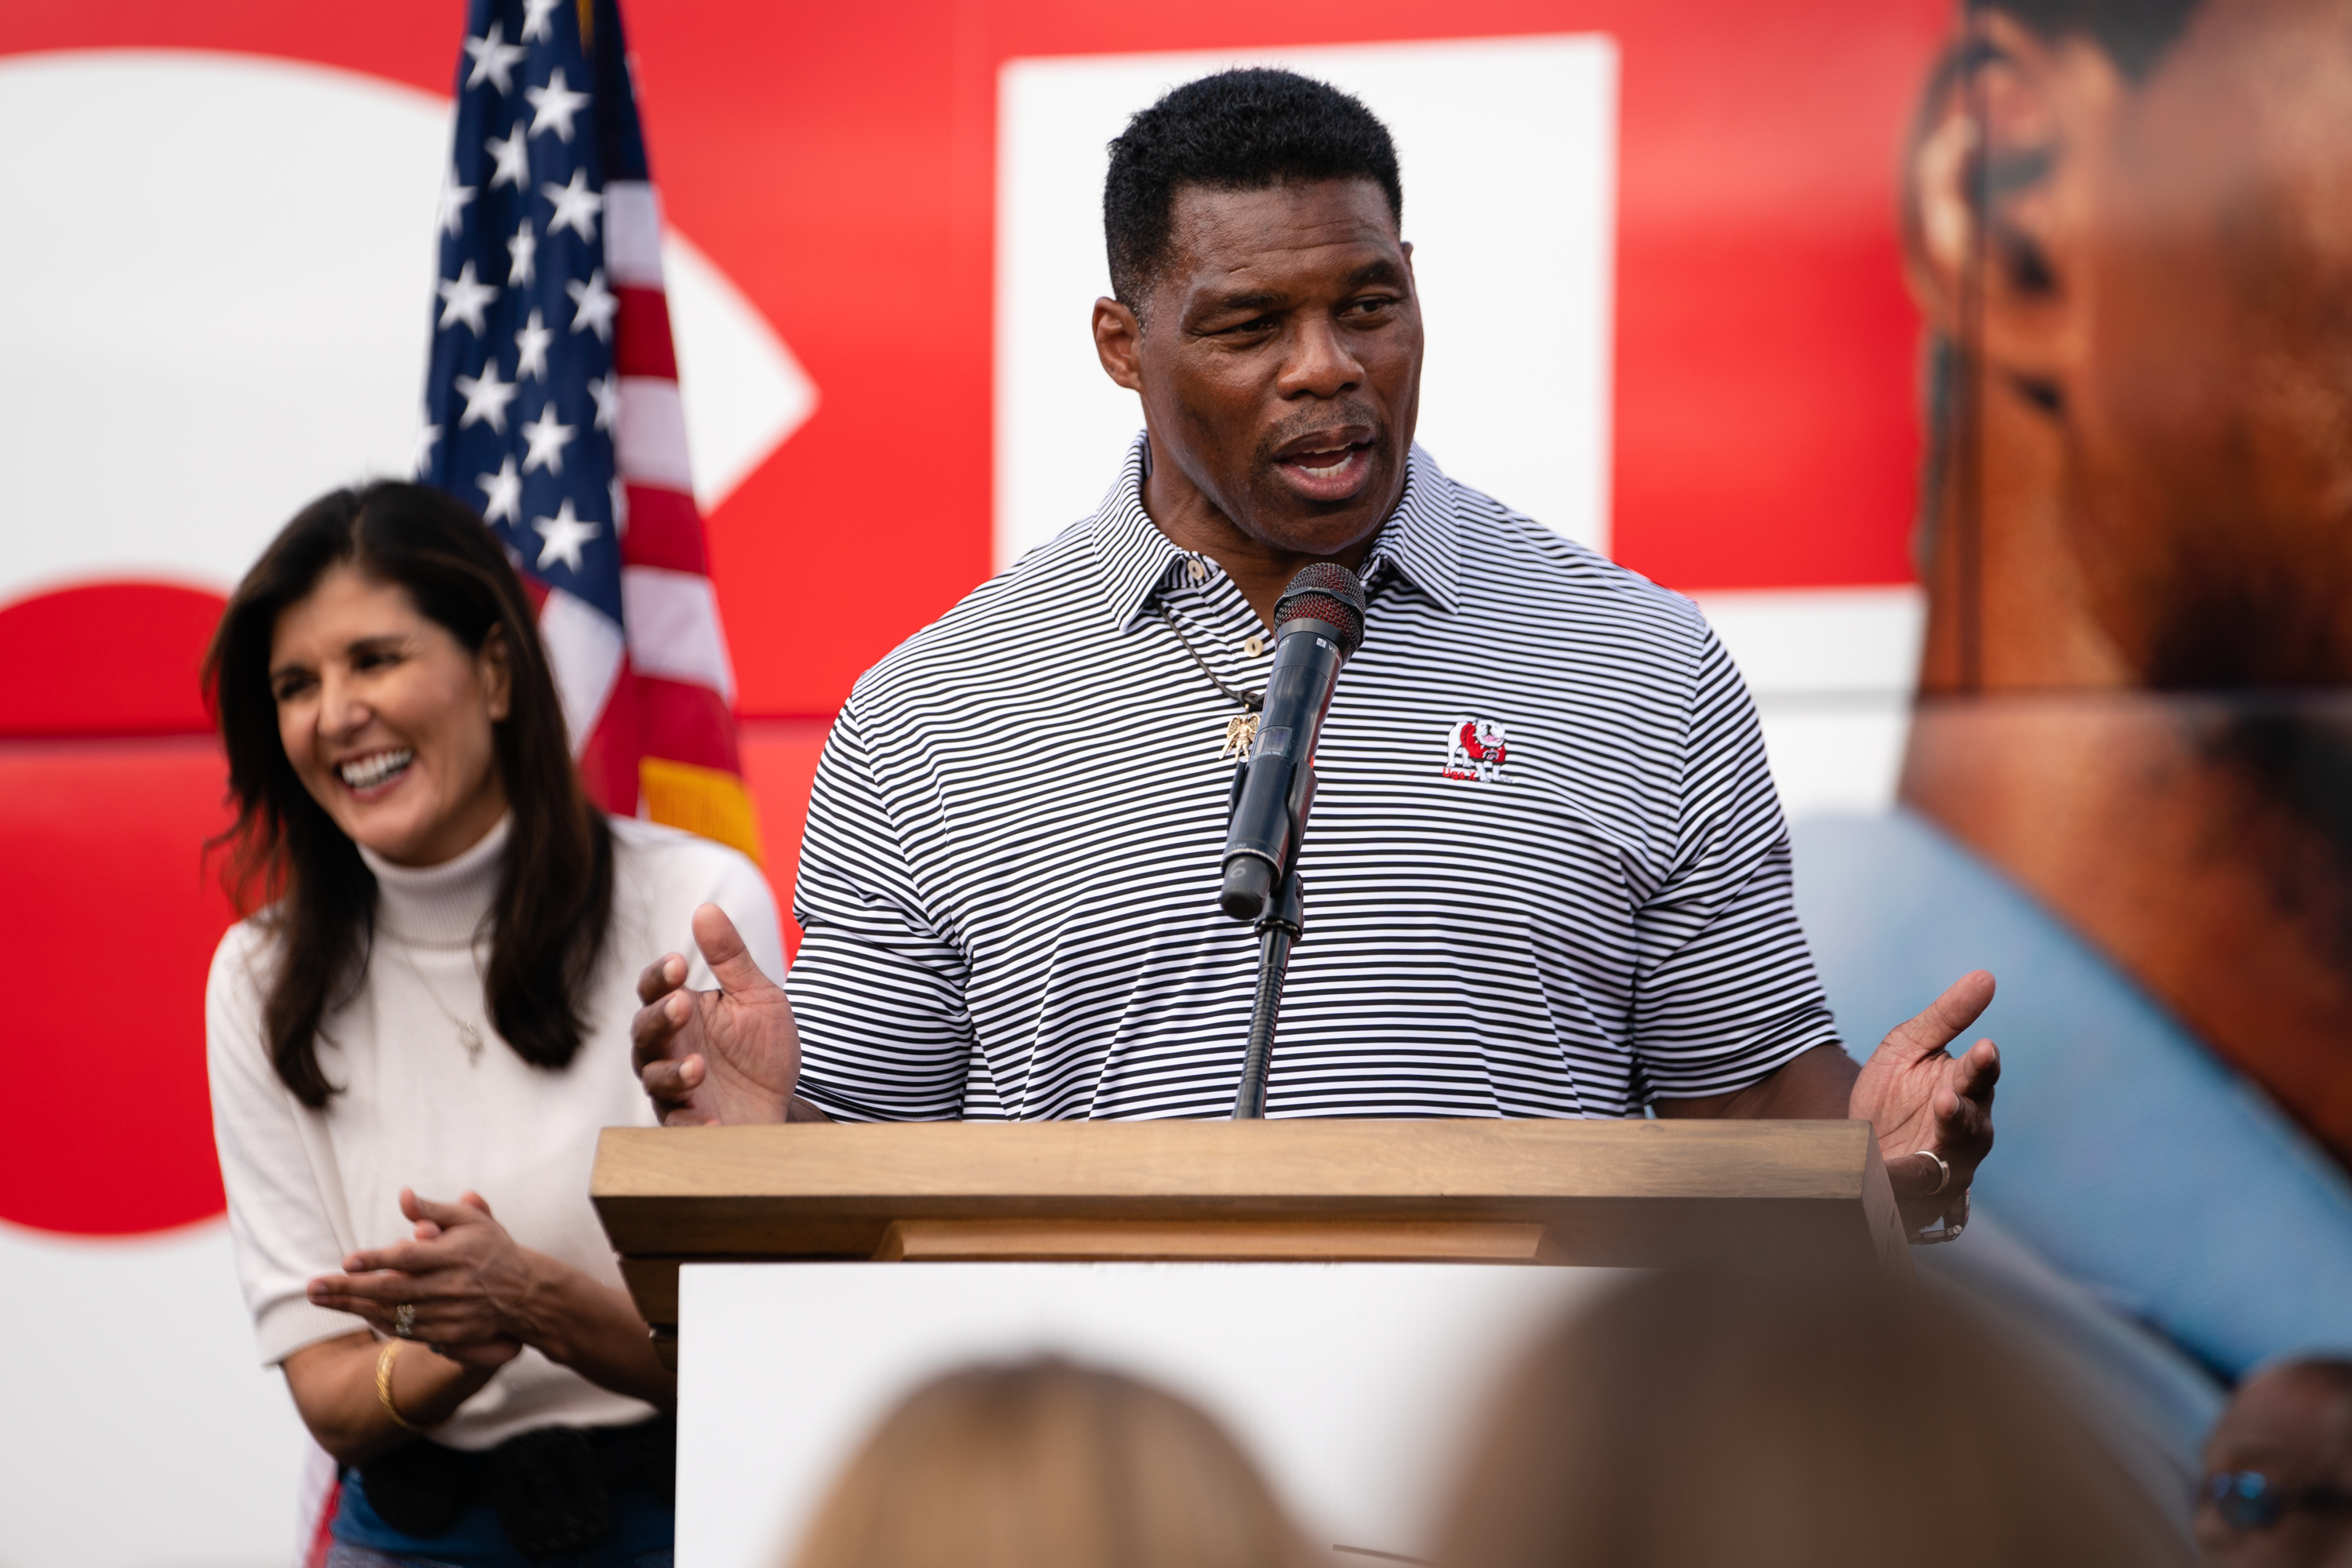 Herschel Walker, Republican candidate for U.S. Senate, speaks at a campaign event on November 6, 2022 in Hiram, Georgia. Recent polls have shown a tightening race against incumbent Sen. Raphael Warnock, with control of the U.S. Senate in the balance.